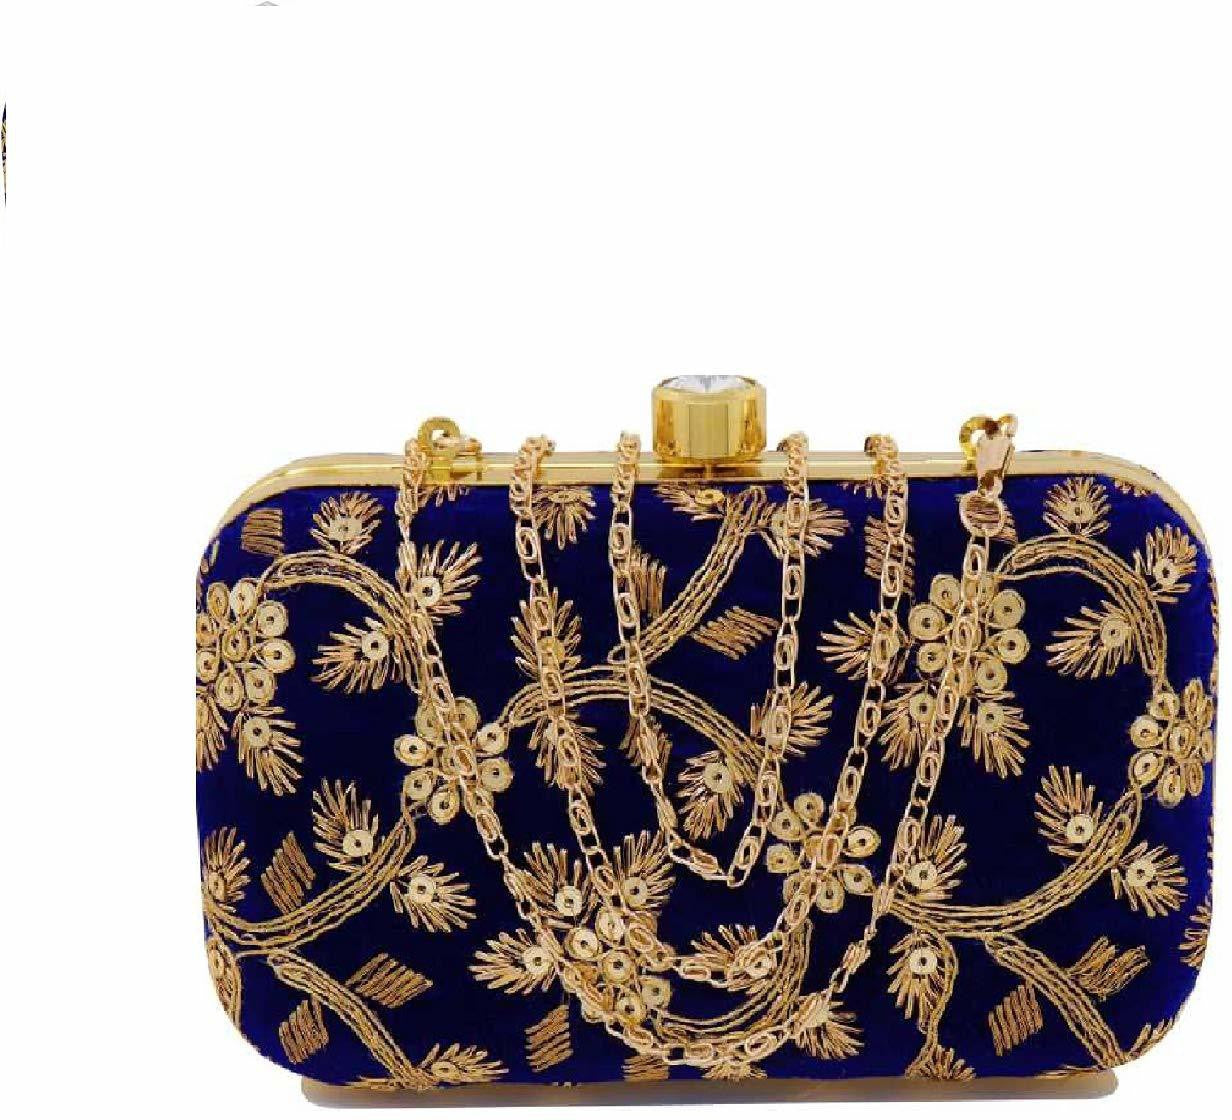 Women's Embroidered Casual  Sling Bag For Clutch Handpurse - Ritzie